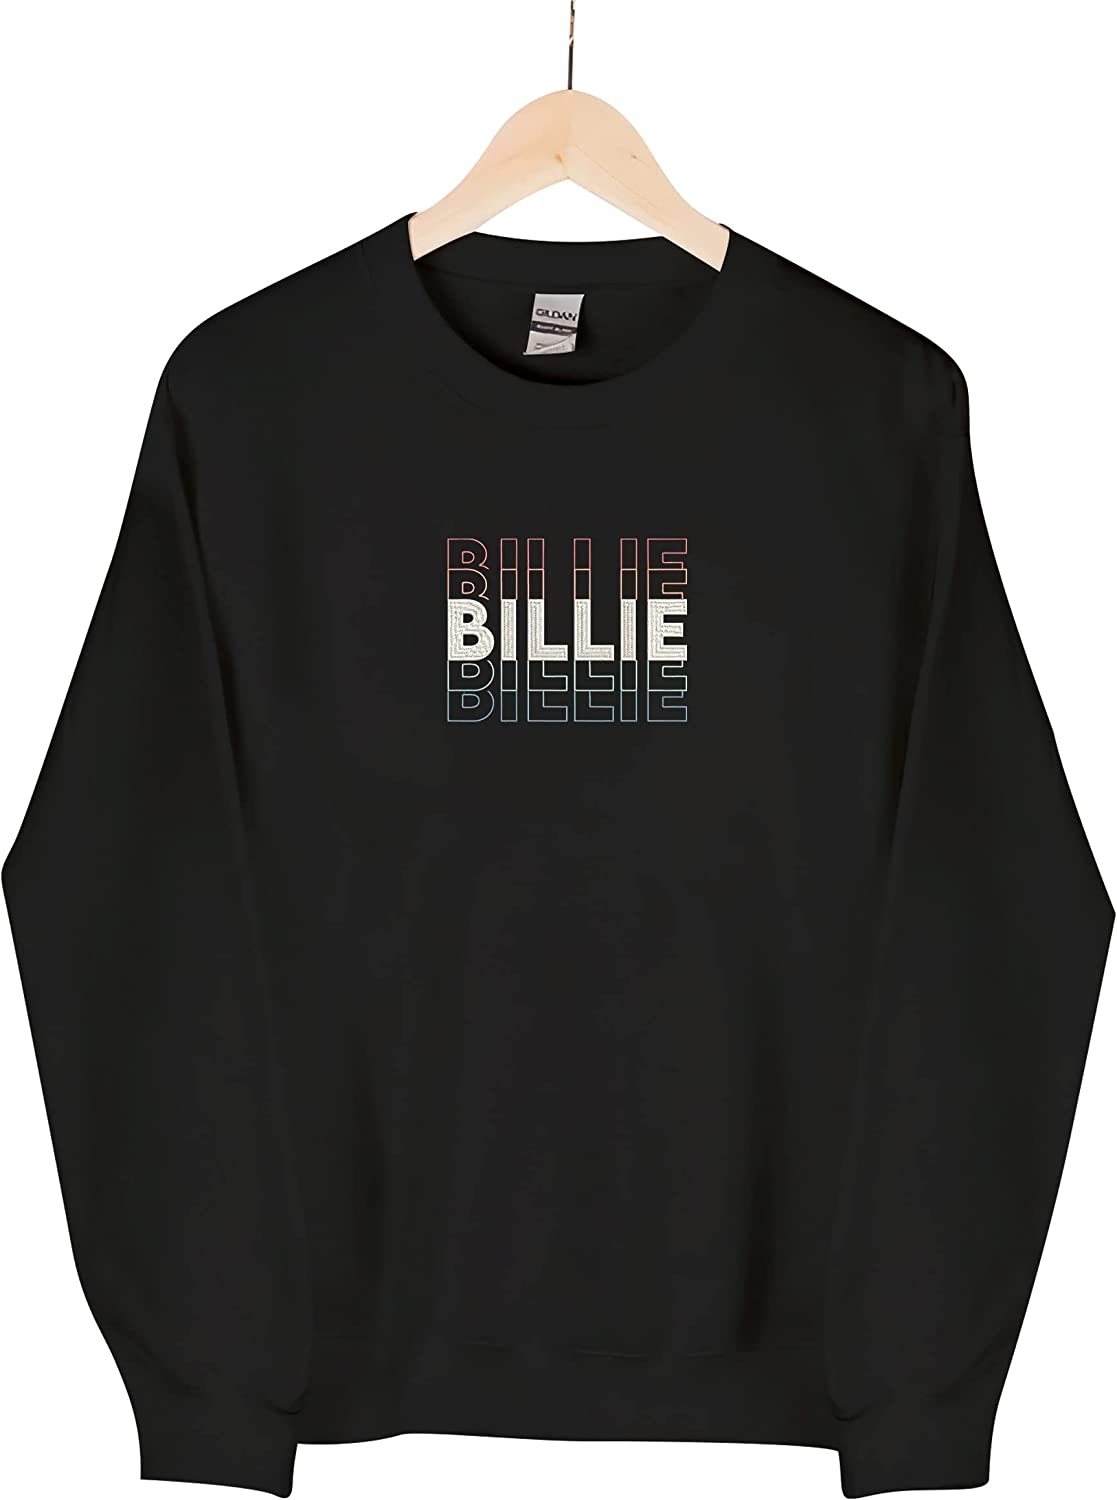 Custom Embroidered Sweatshirt Retro Personalized BILLIE or Any First Name Pullover Crewneck